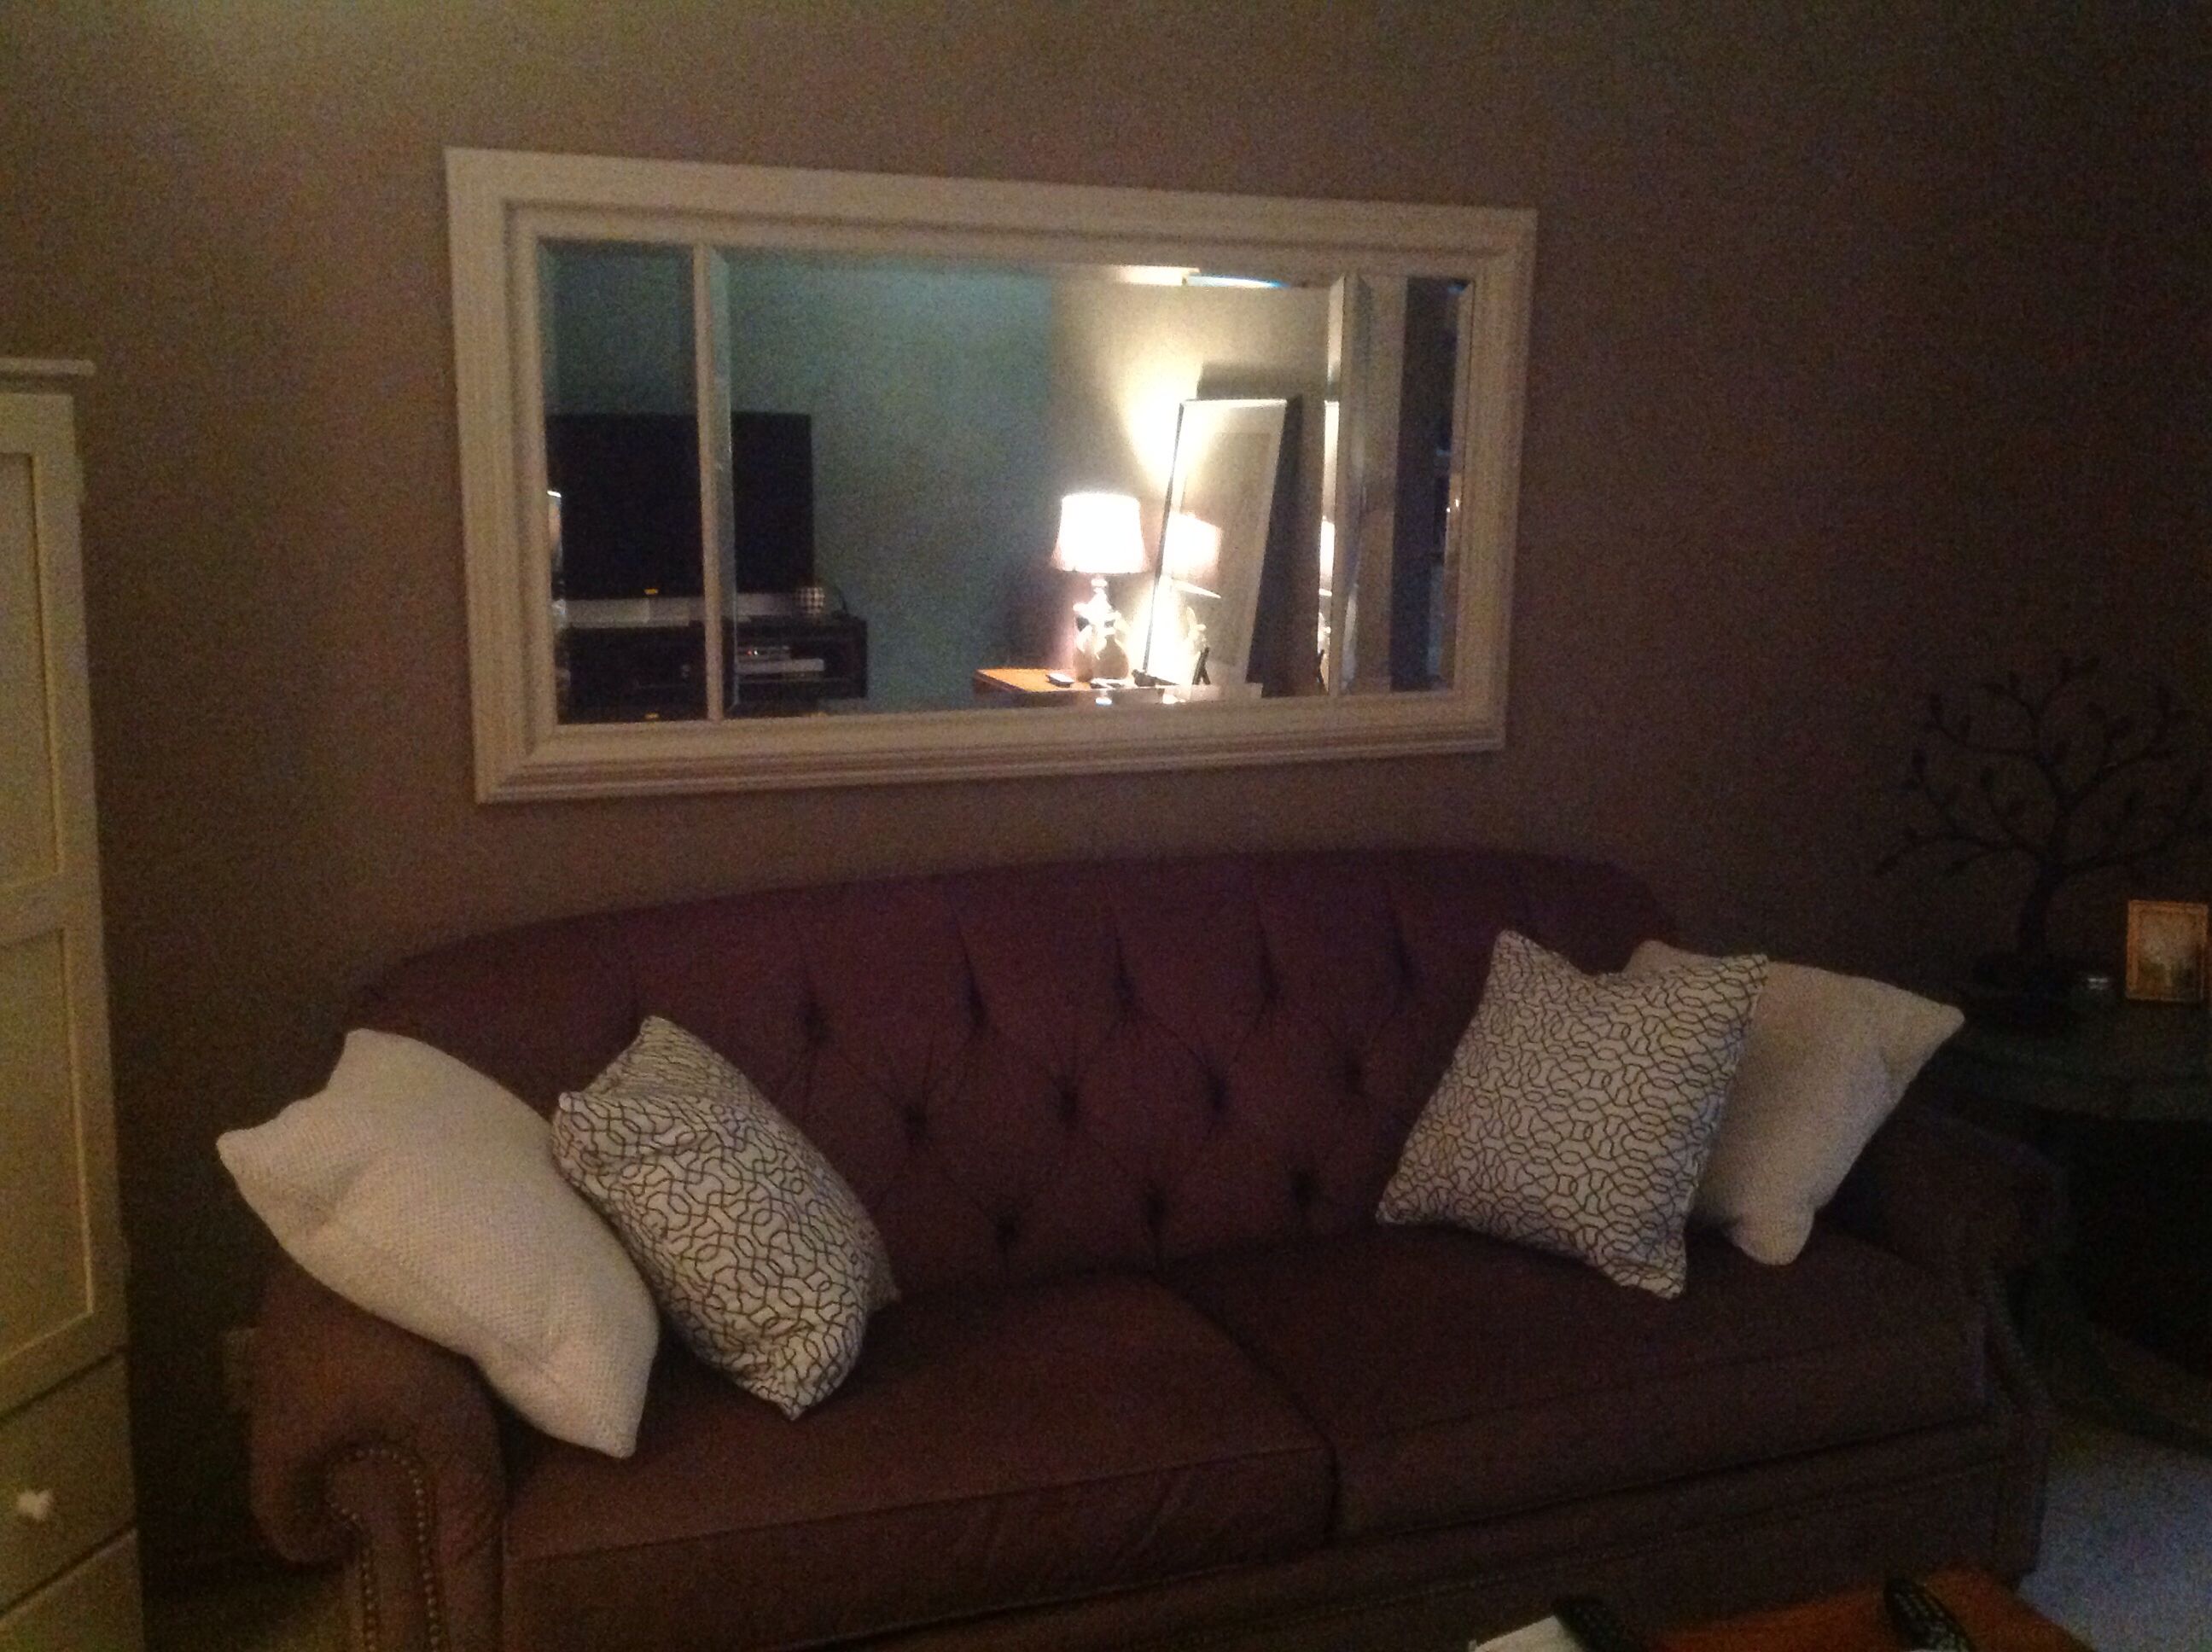 Sofa Mirror Wall: A Reflection Of Style And Functionality